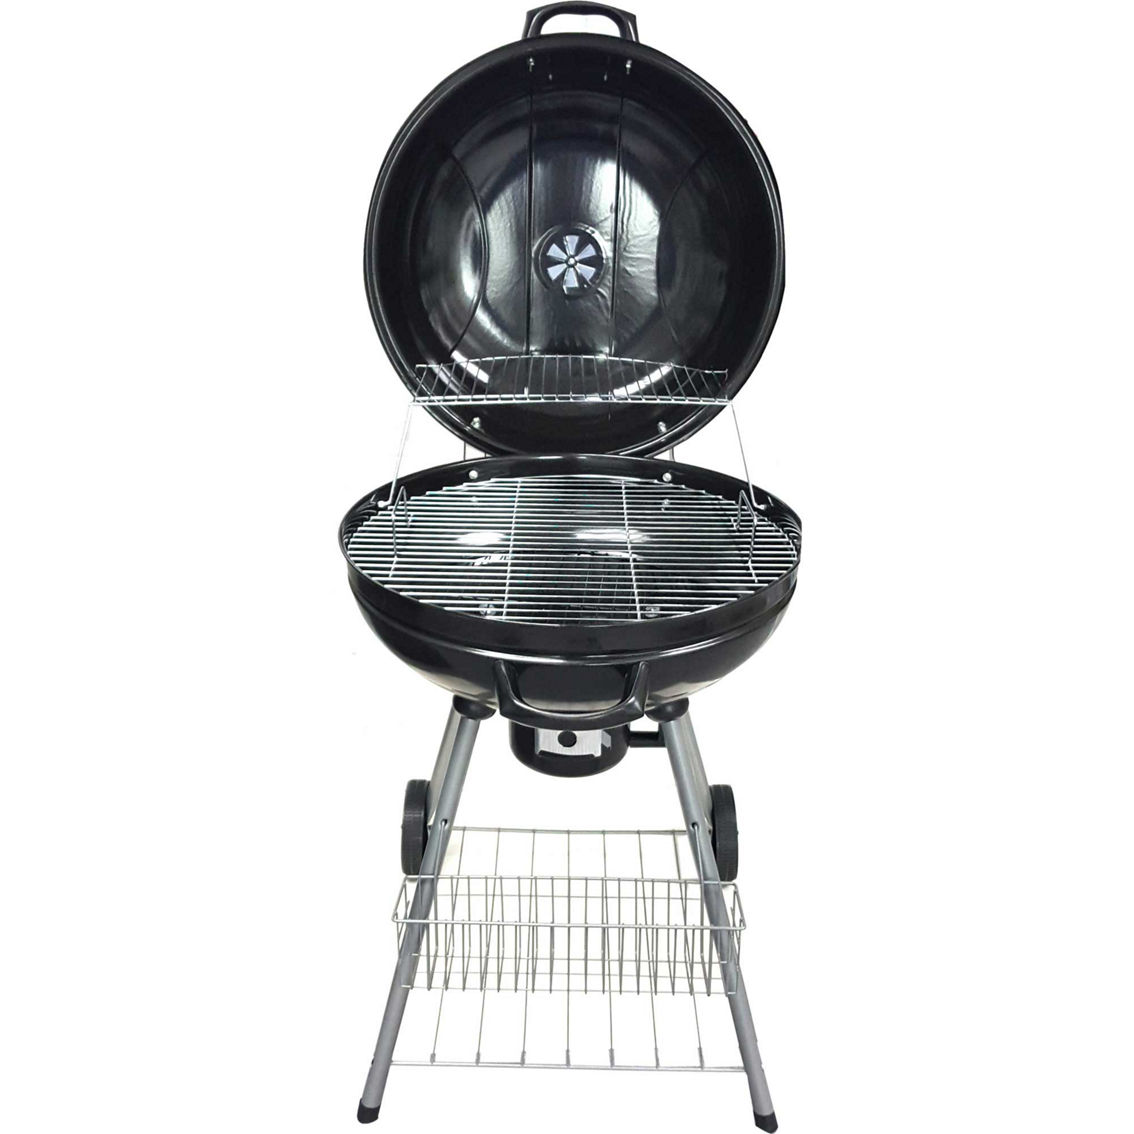 GrillSmith Pioneer 22.5 in. Charcoal Grill with Hinged Lid - Image 3 of 6